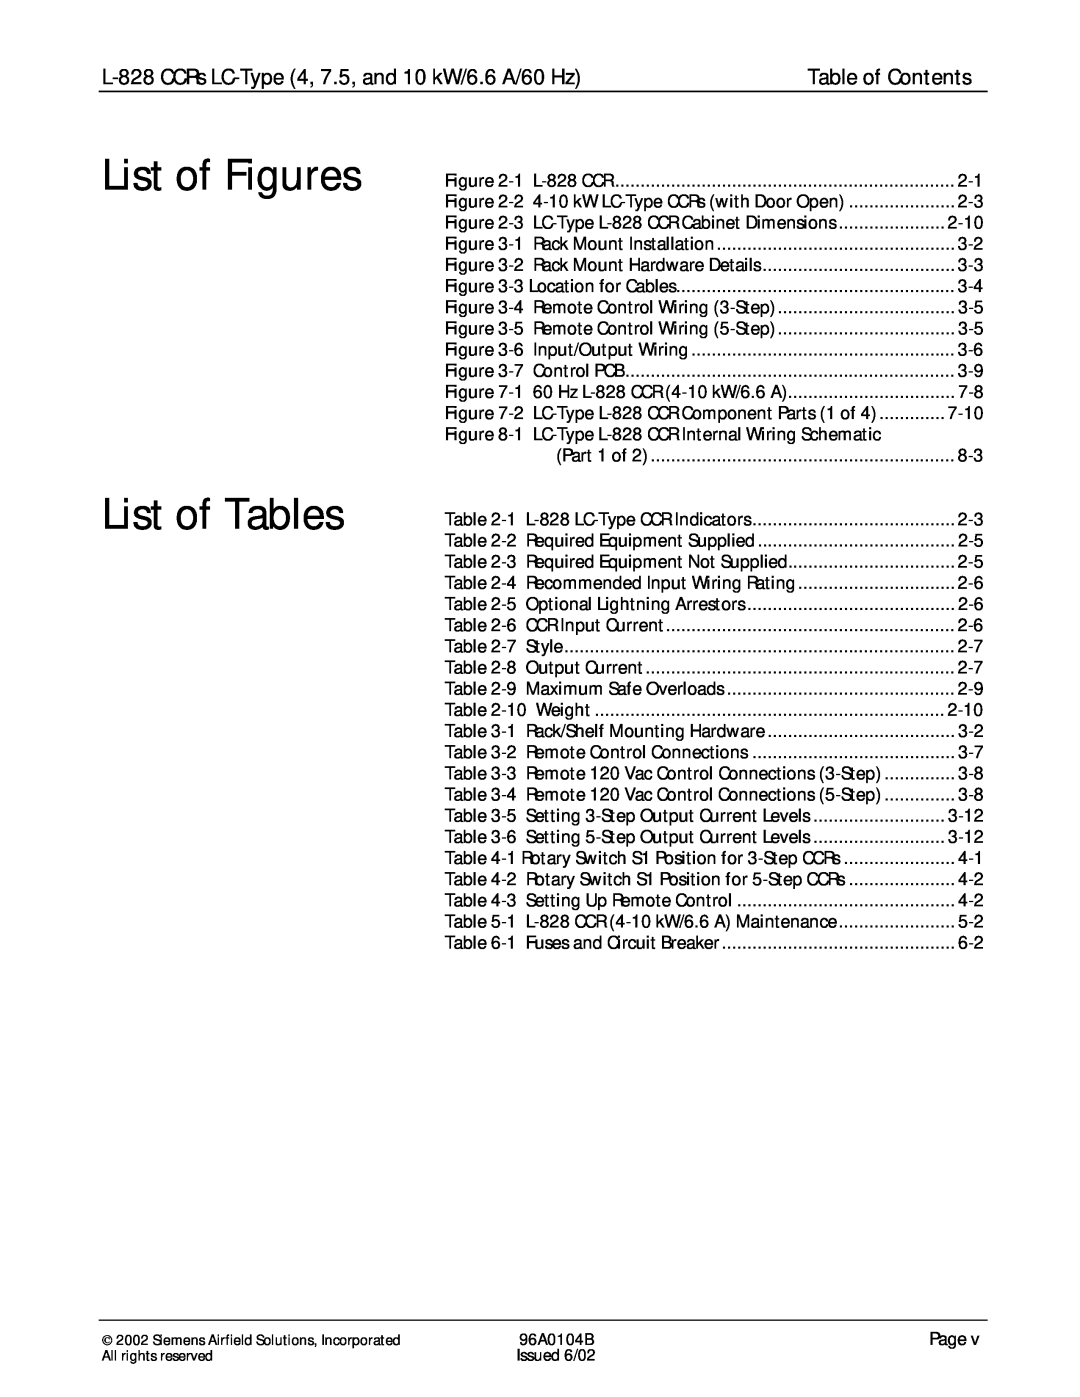 Siemens manual List of Figures List of Tables, L-828CCRs LC-Type4, 7.5, and 10 kW/6.6 A/60 Hz, Table of Contents 